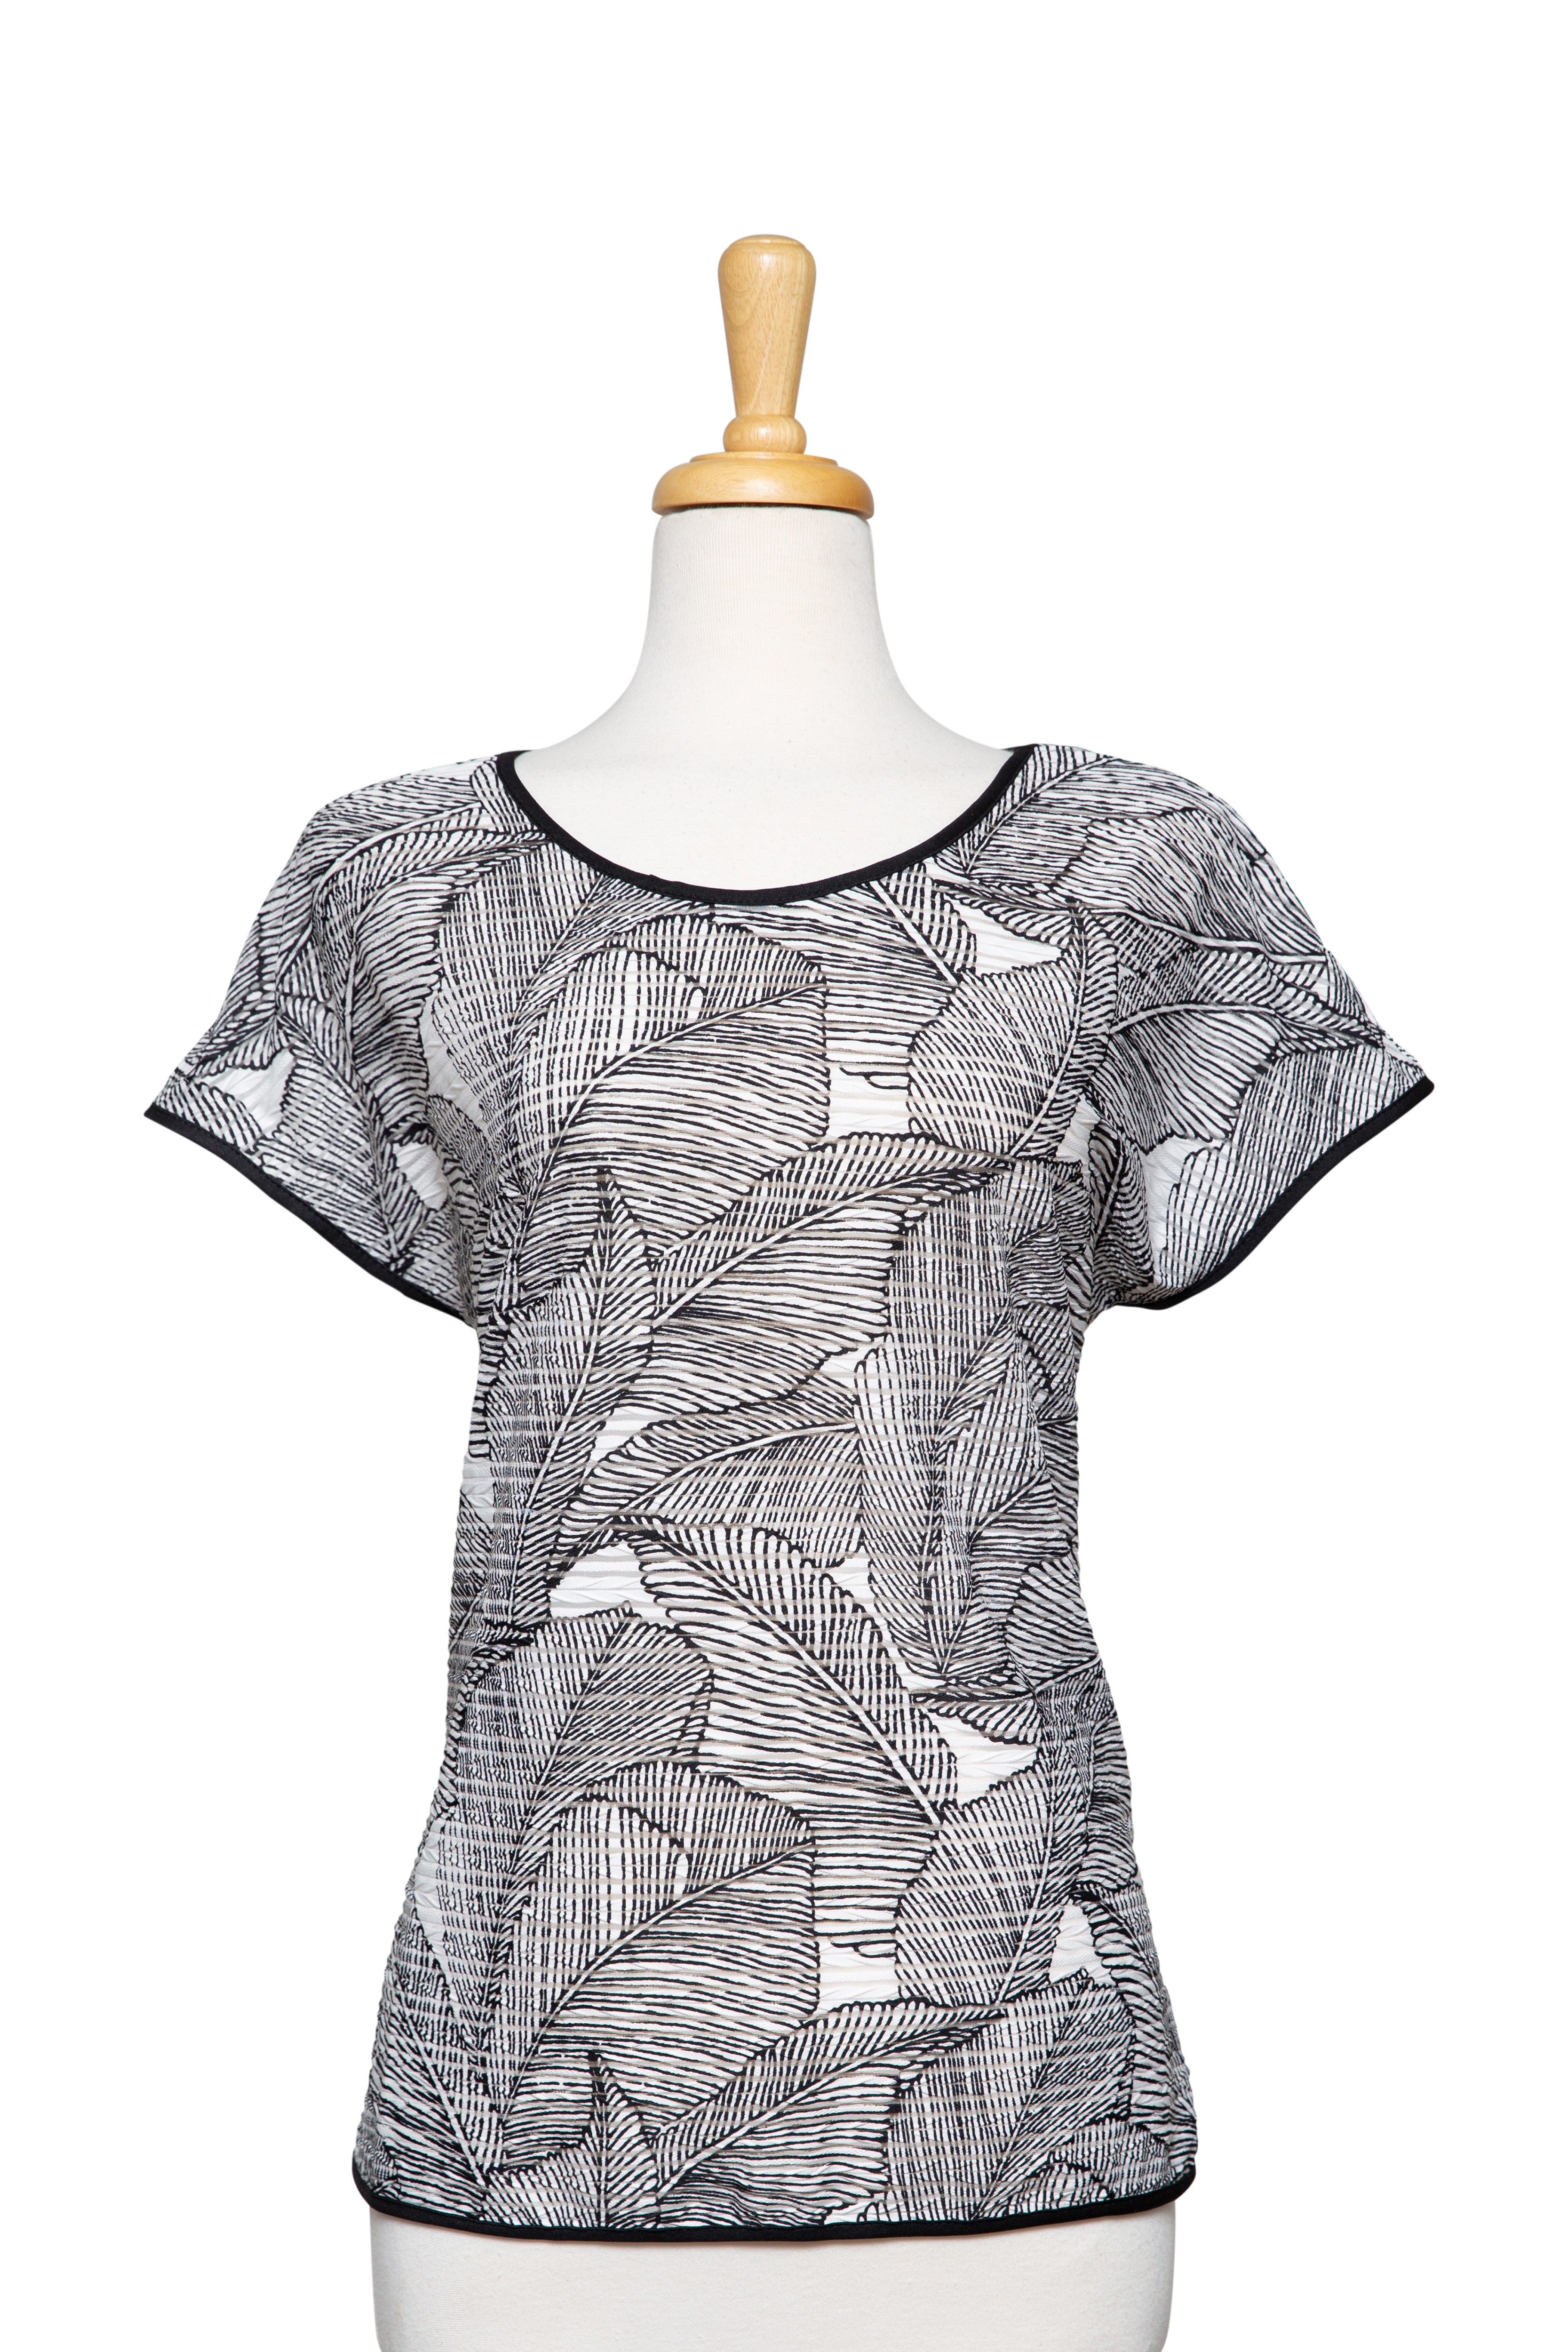 White and Black Tropical Leaves Short Sleeve Top